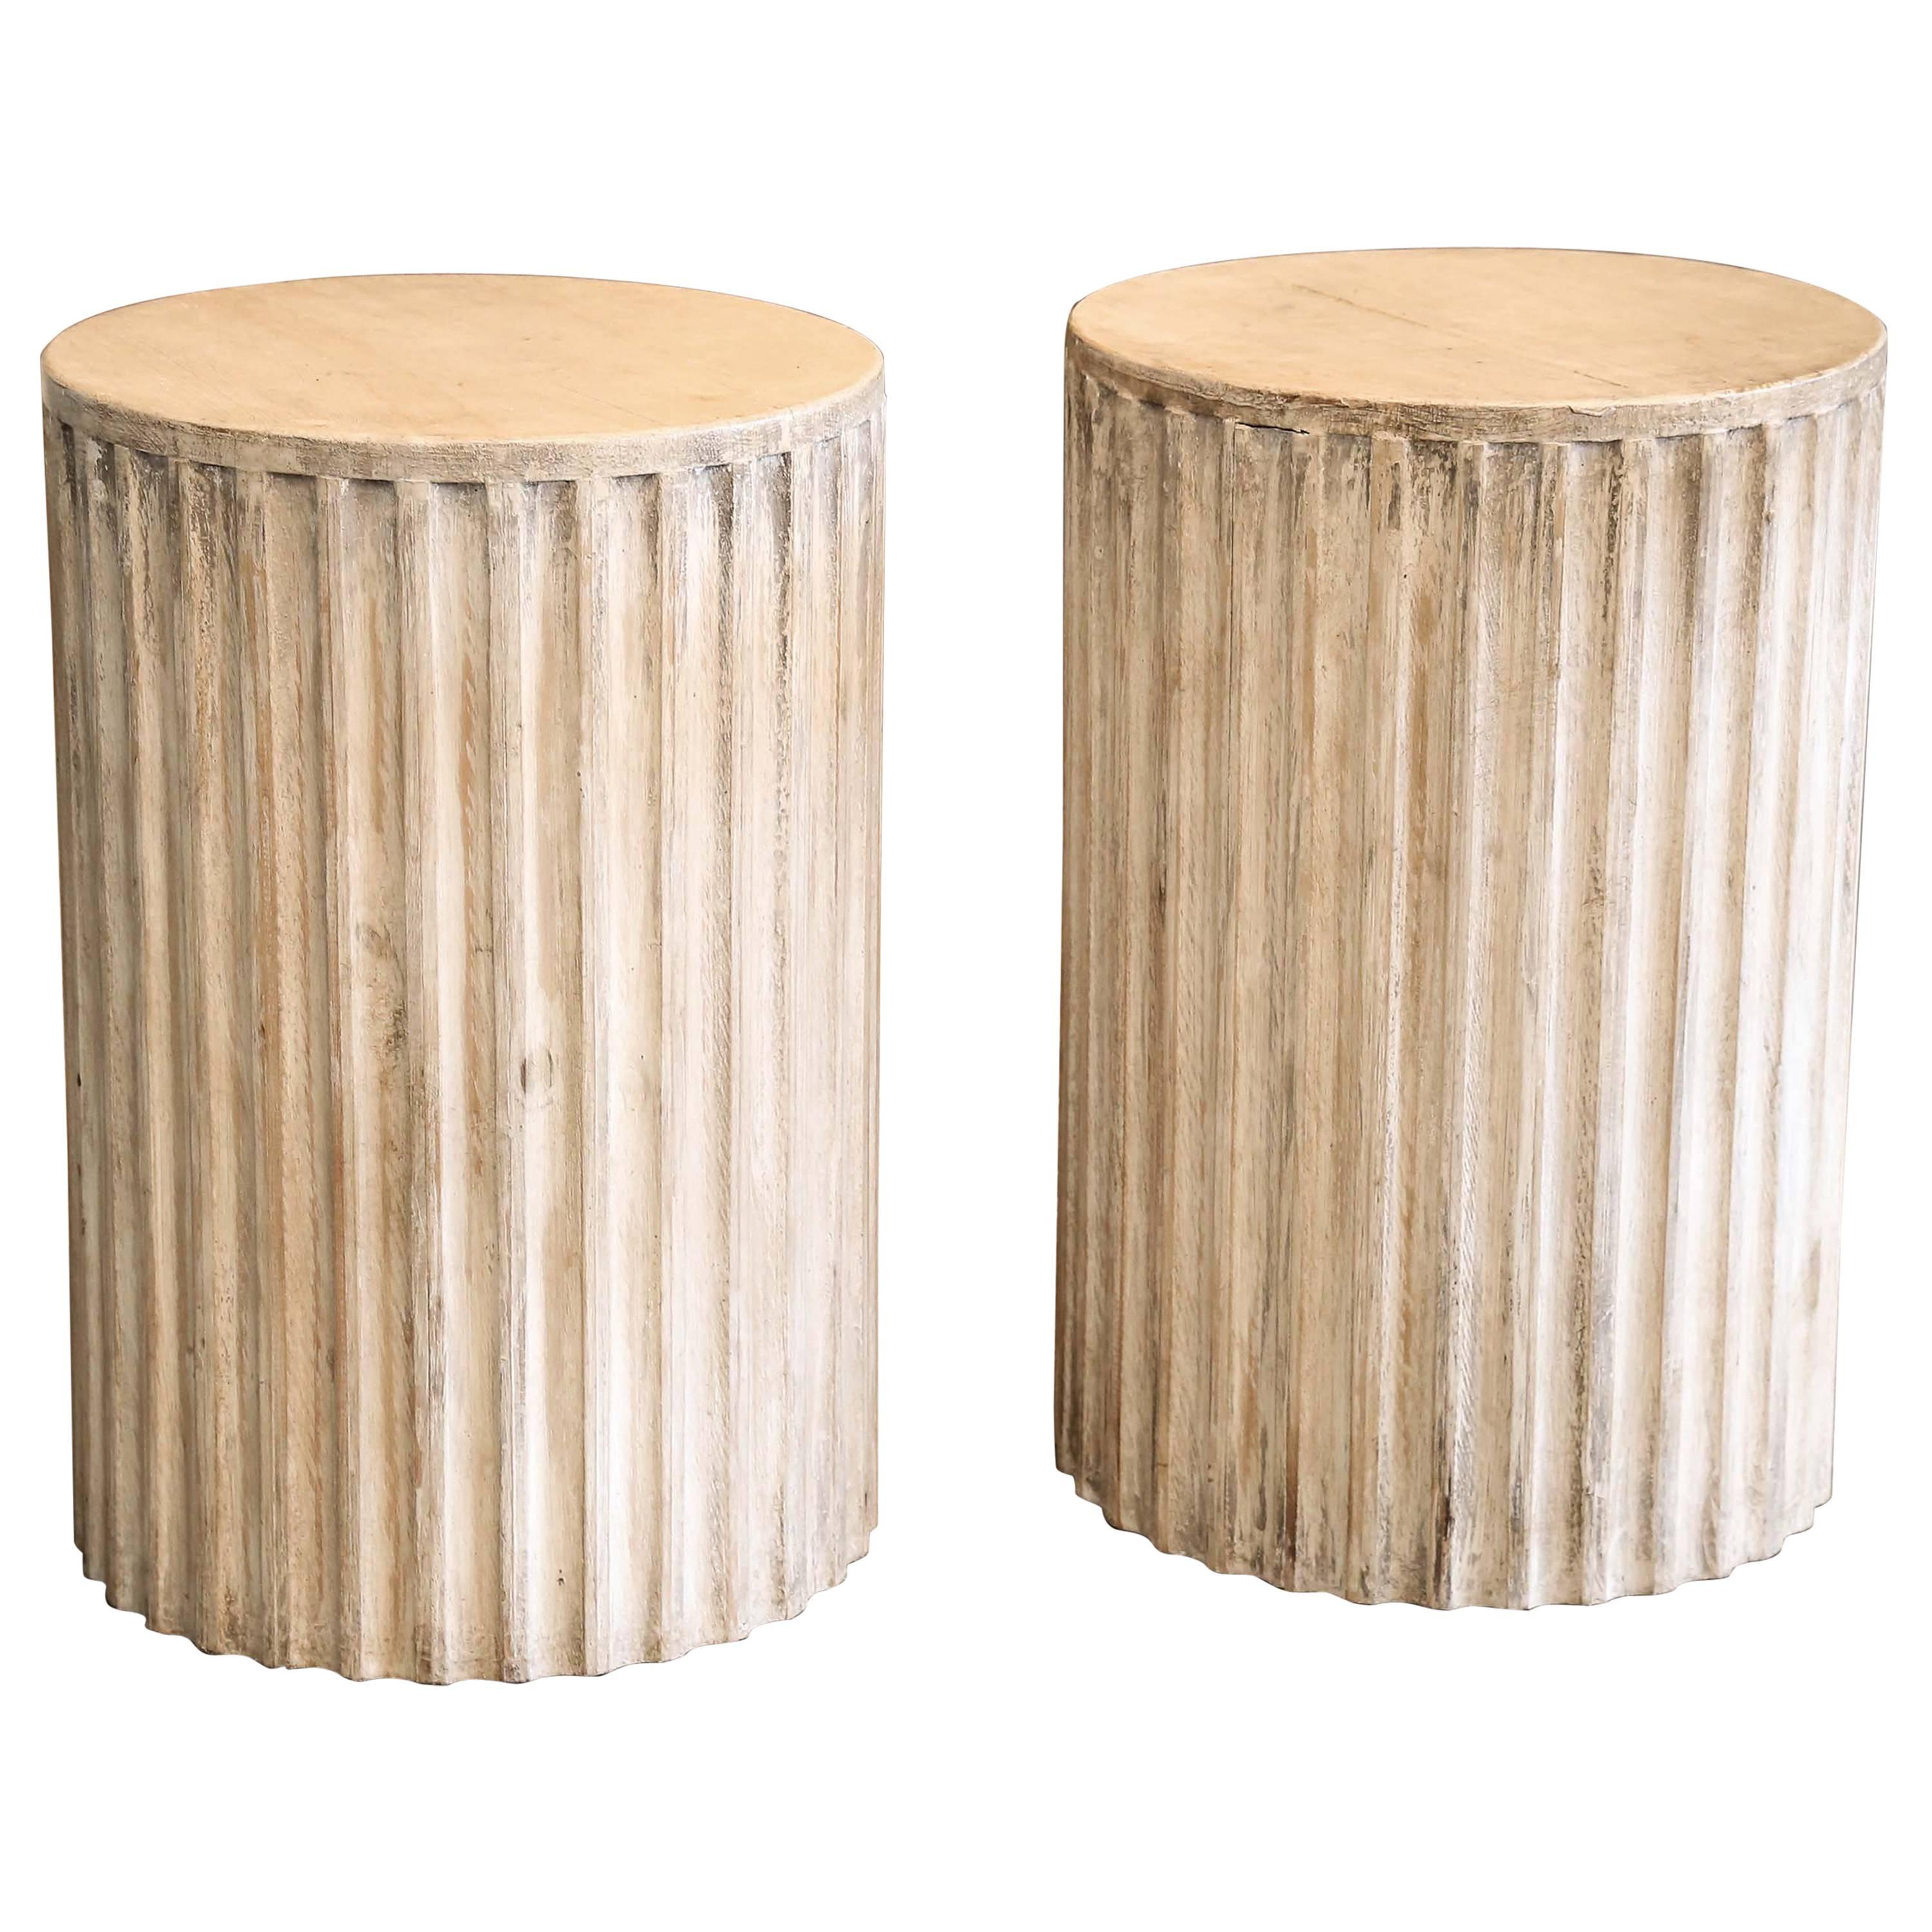 Painted wood fluted column pedestal as a side table. Some custom sizes available.